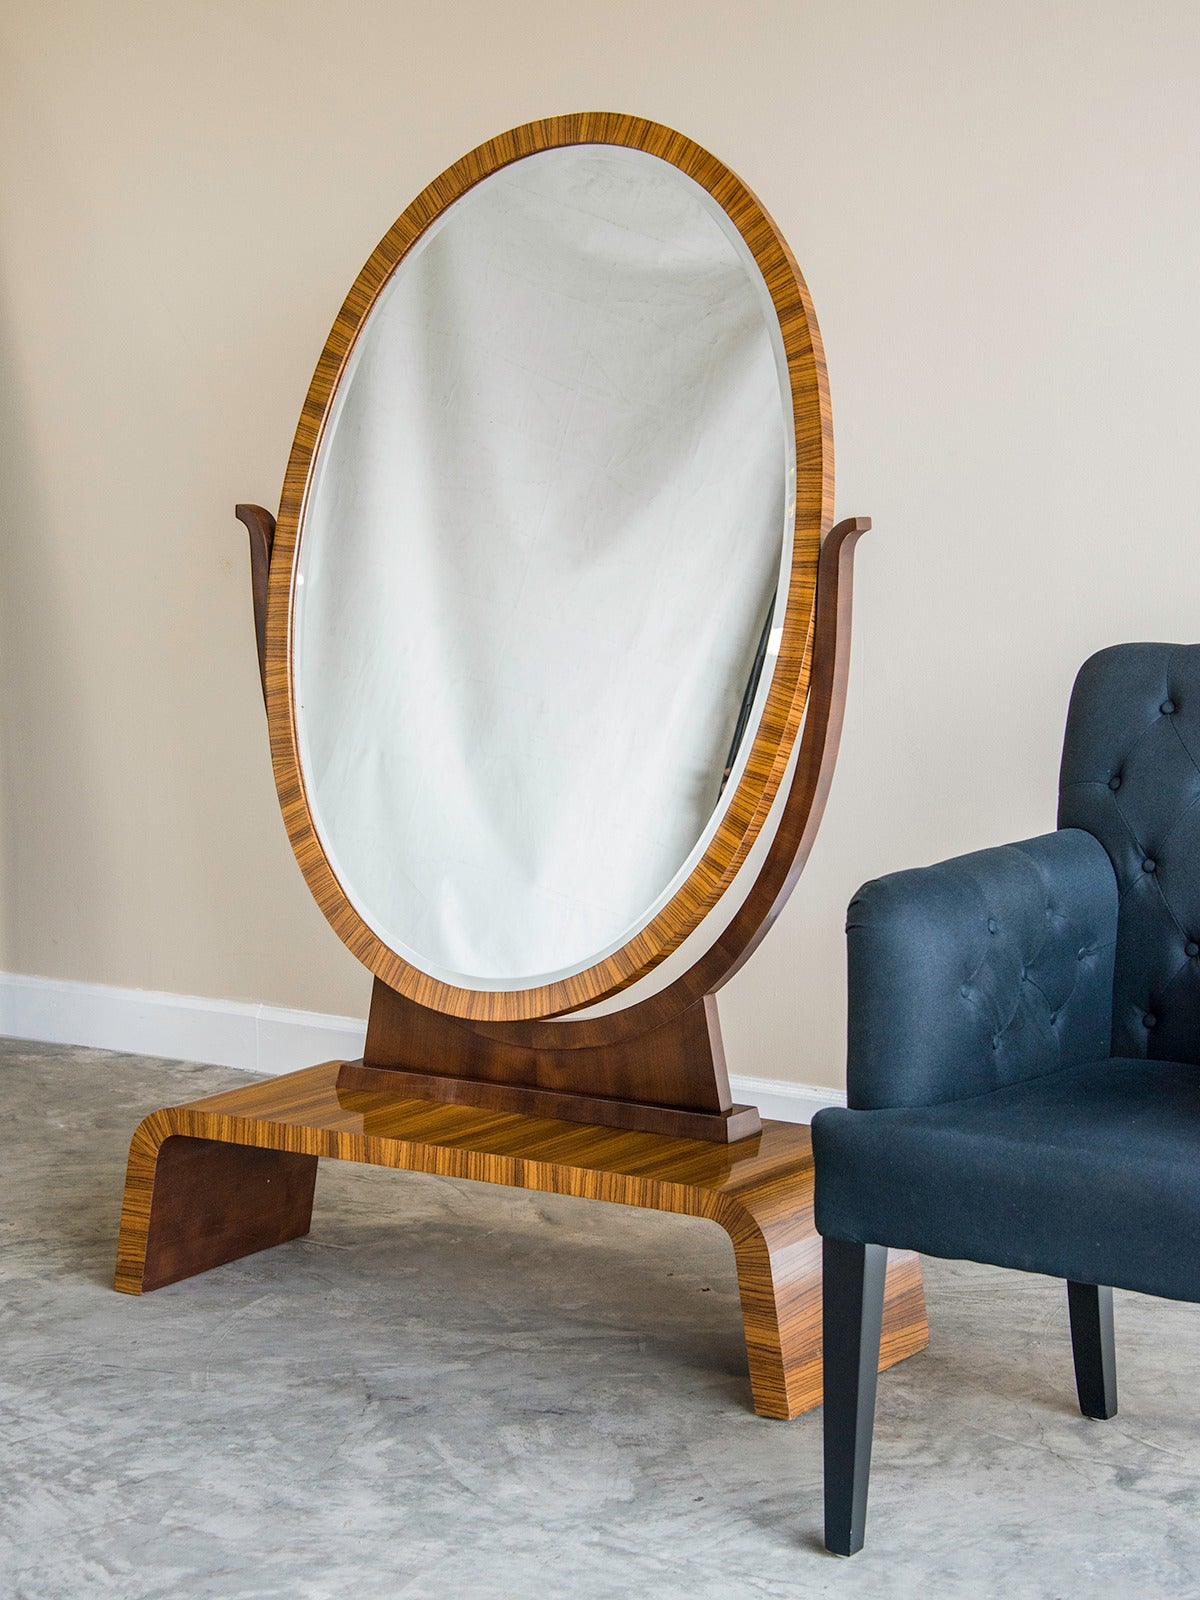 Art Deco period pale palisander oval dressing mirror, Vienna, Austria circa 1930. This full length mirror is a luxurious artifact of a glamorous period when dressing in an elegant fashion was an integral component of a well lived life. The elegant